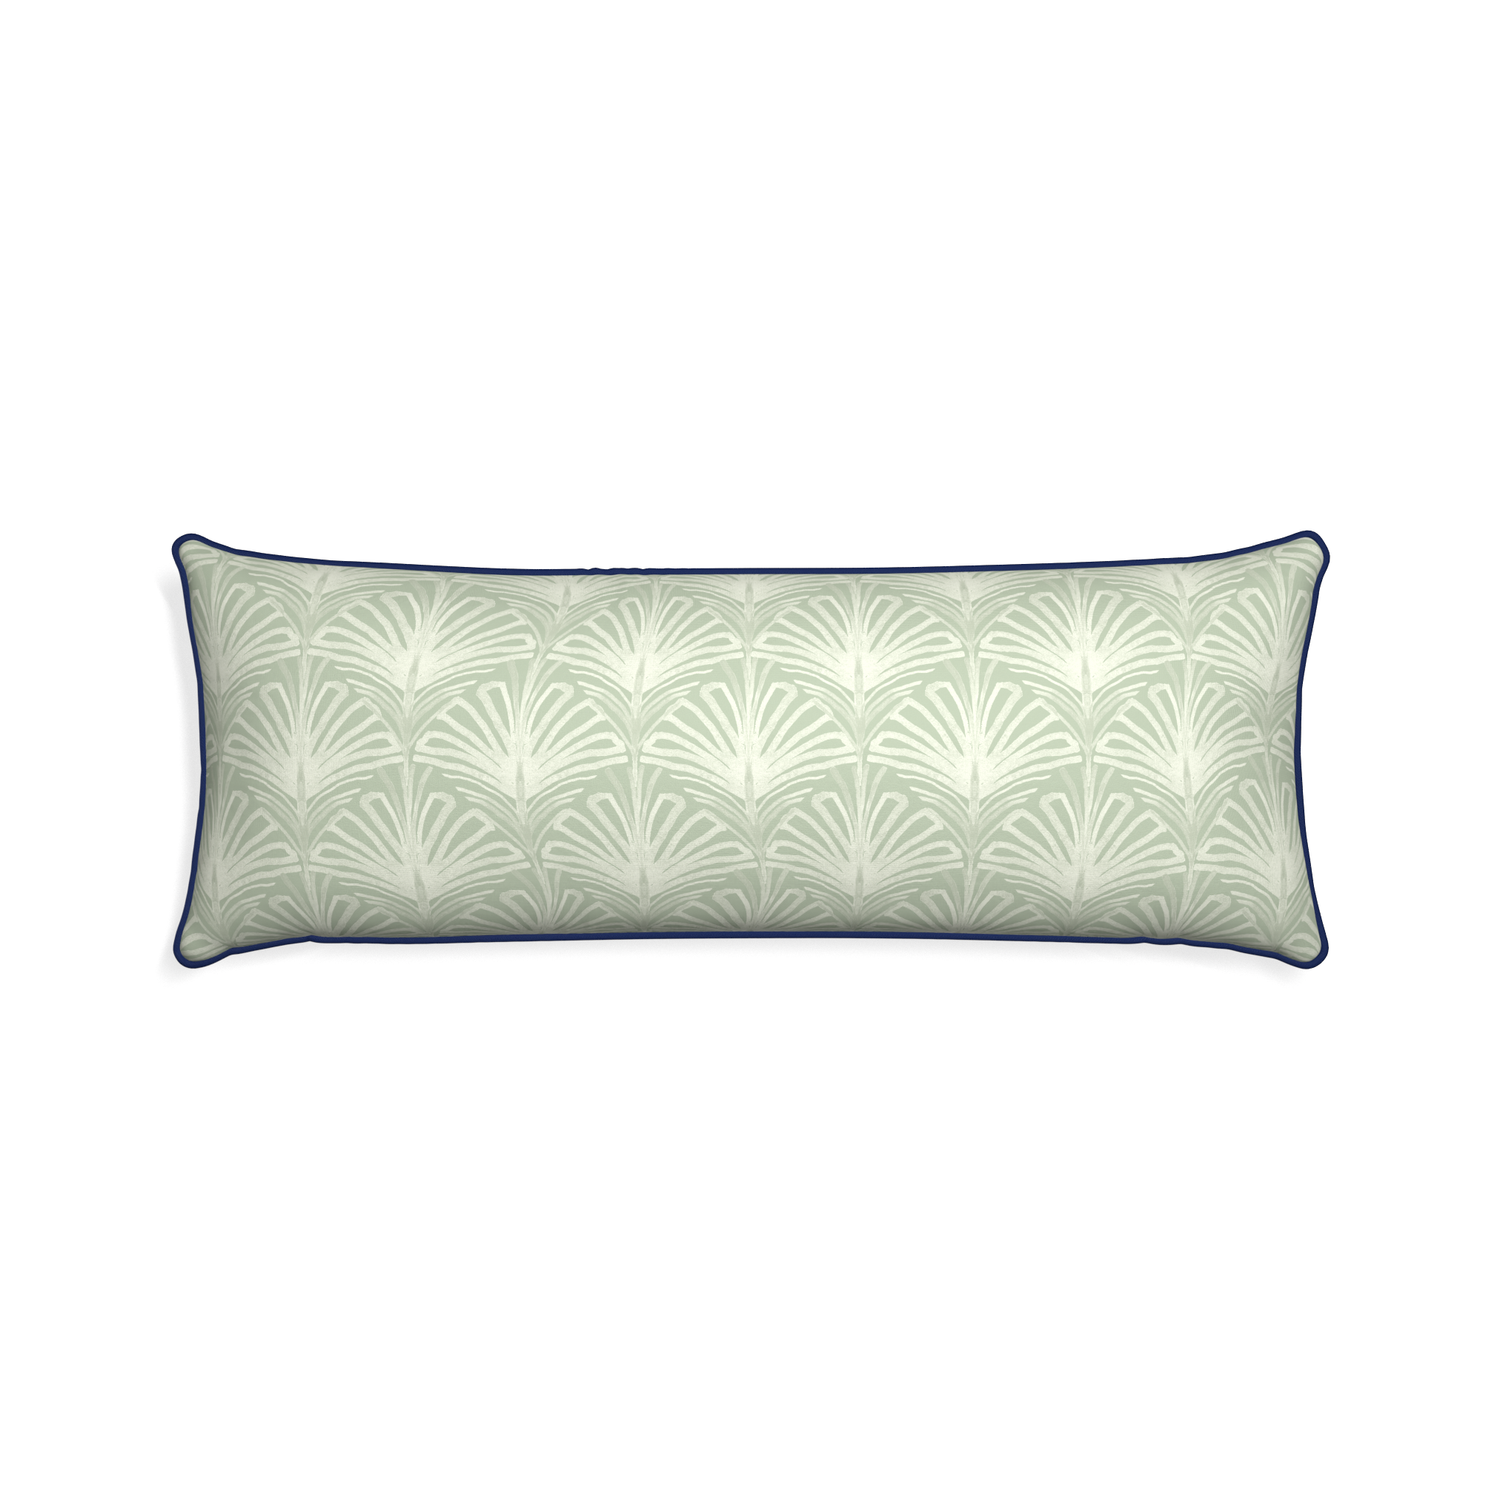 Xl-lumbar suzy sage custom sage green palmpillow with midnight piping on white background